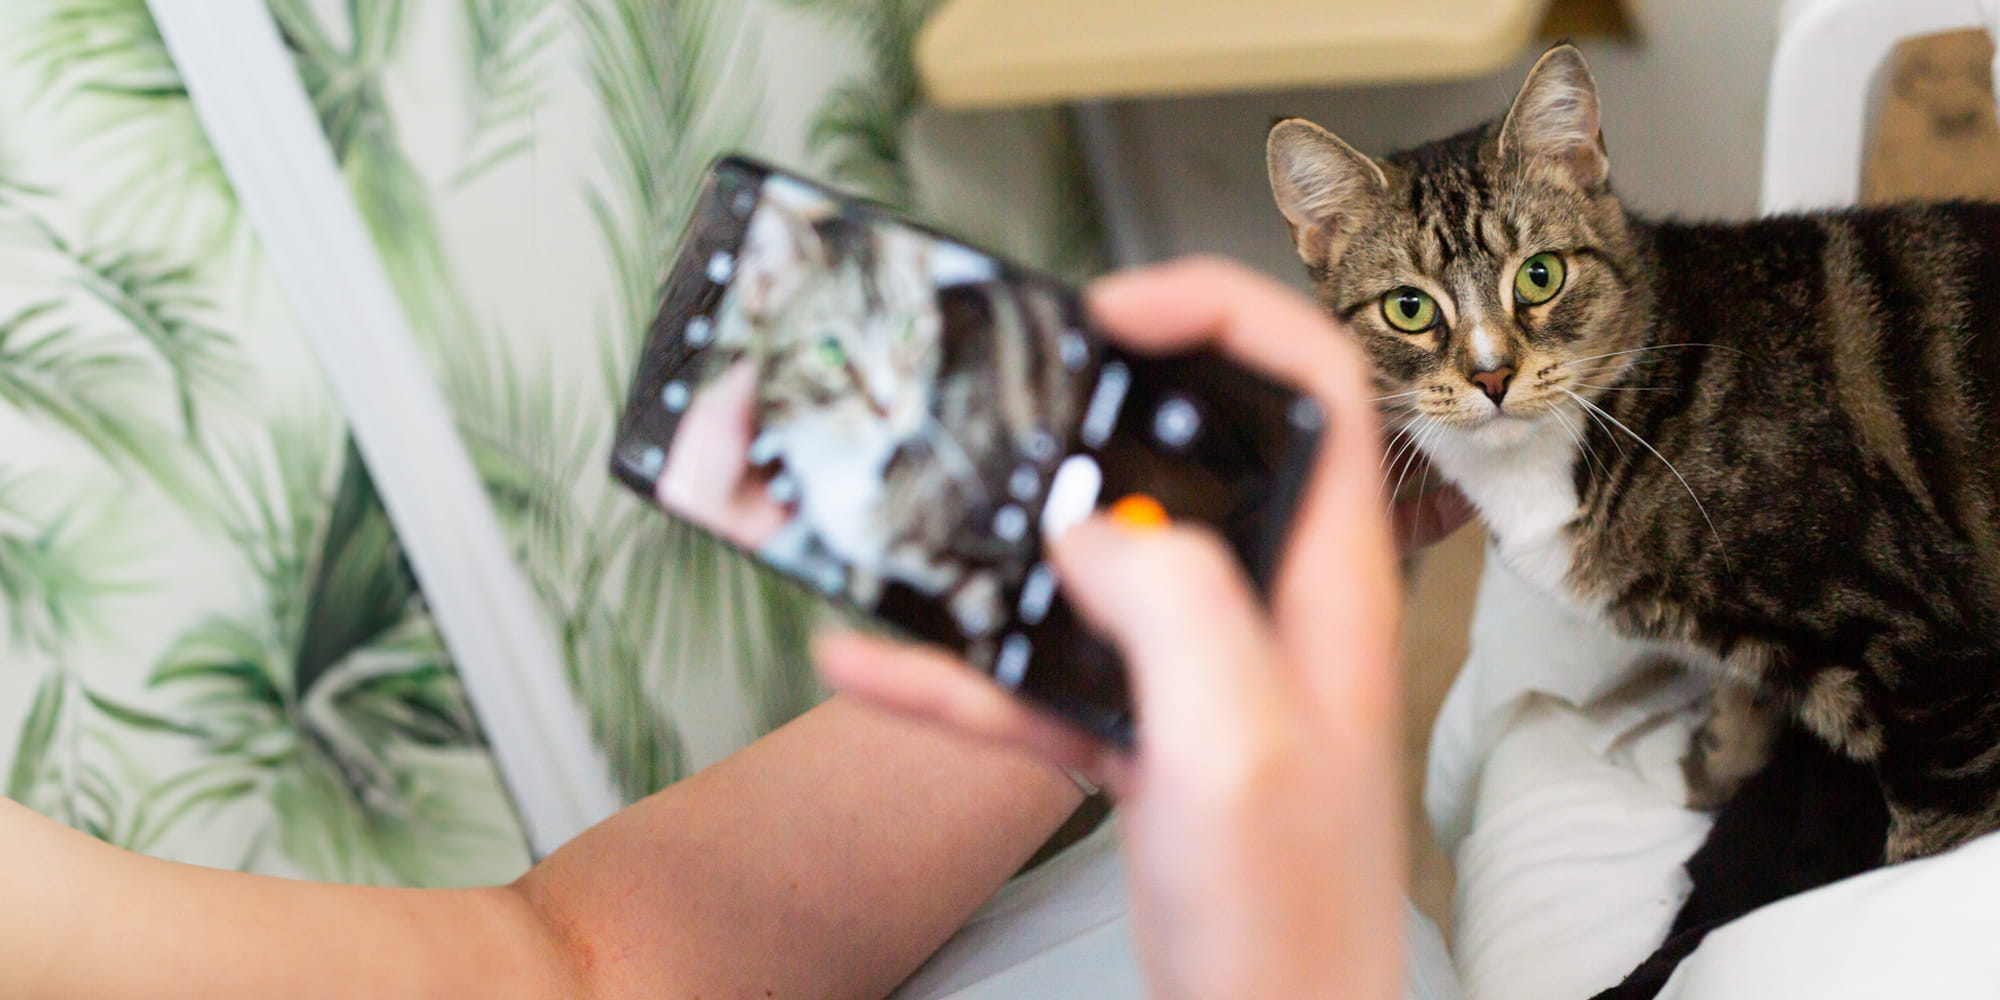 Is your pet picture pawfect?